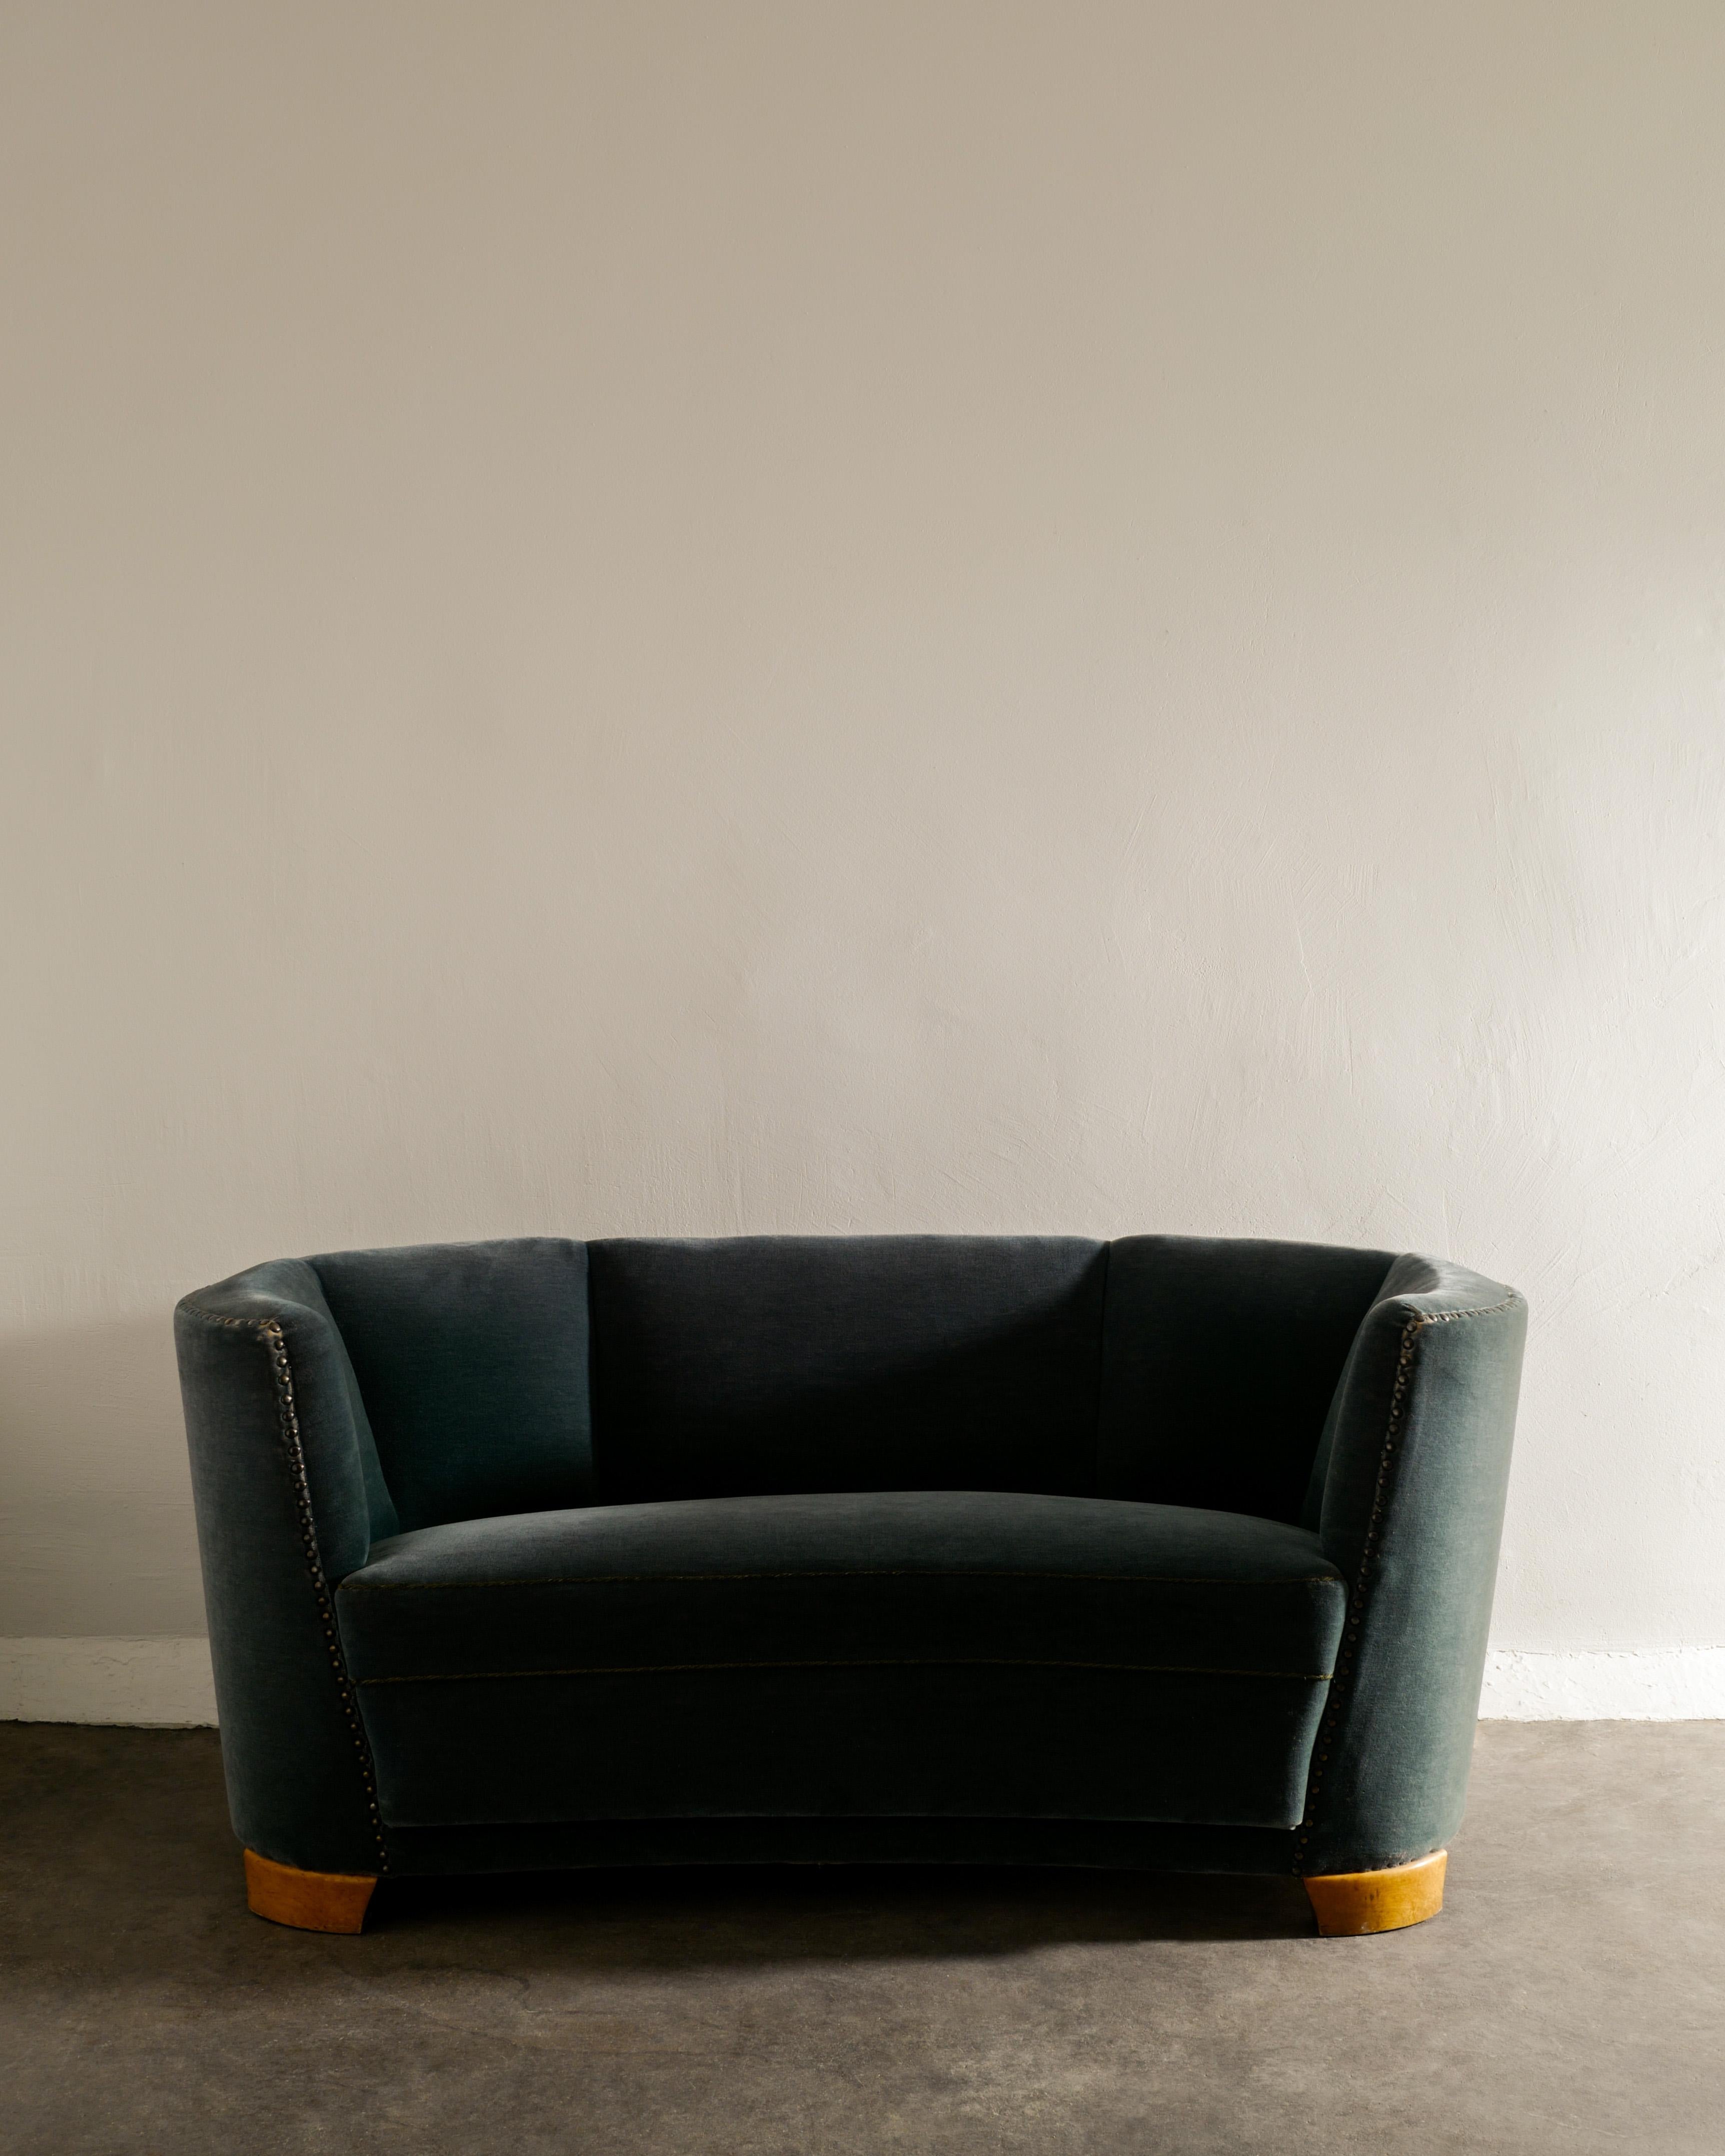 Rare two seater Swedish mid century modern curved sofa in style of Otto Schultz. The dark green velvet upholstery appear to be original and is in good condition. Many nice details such as the feet in beech and iron rivets along the top edge.